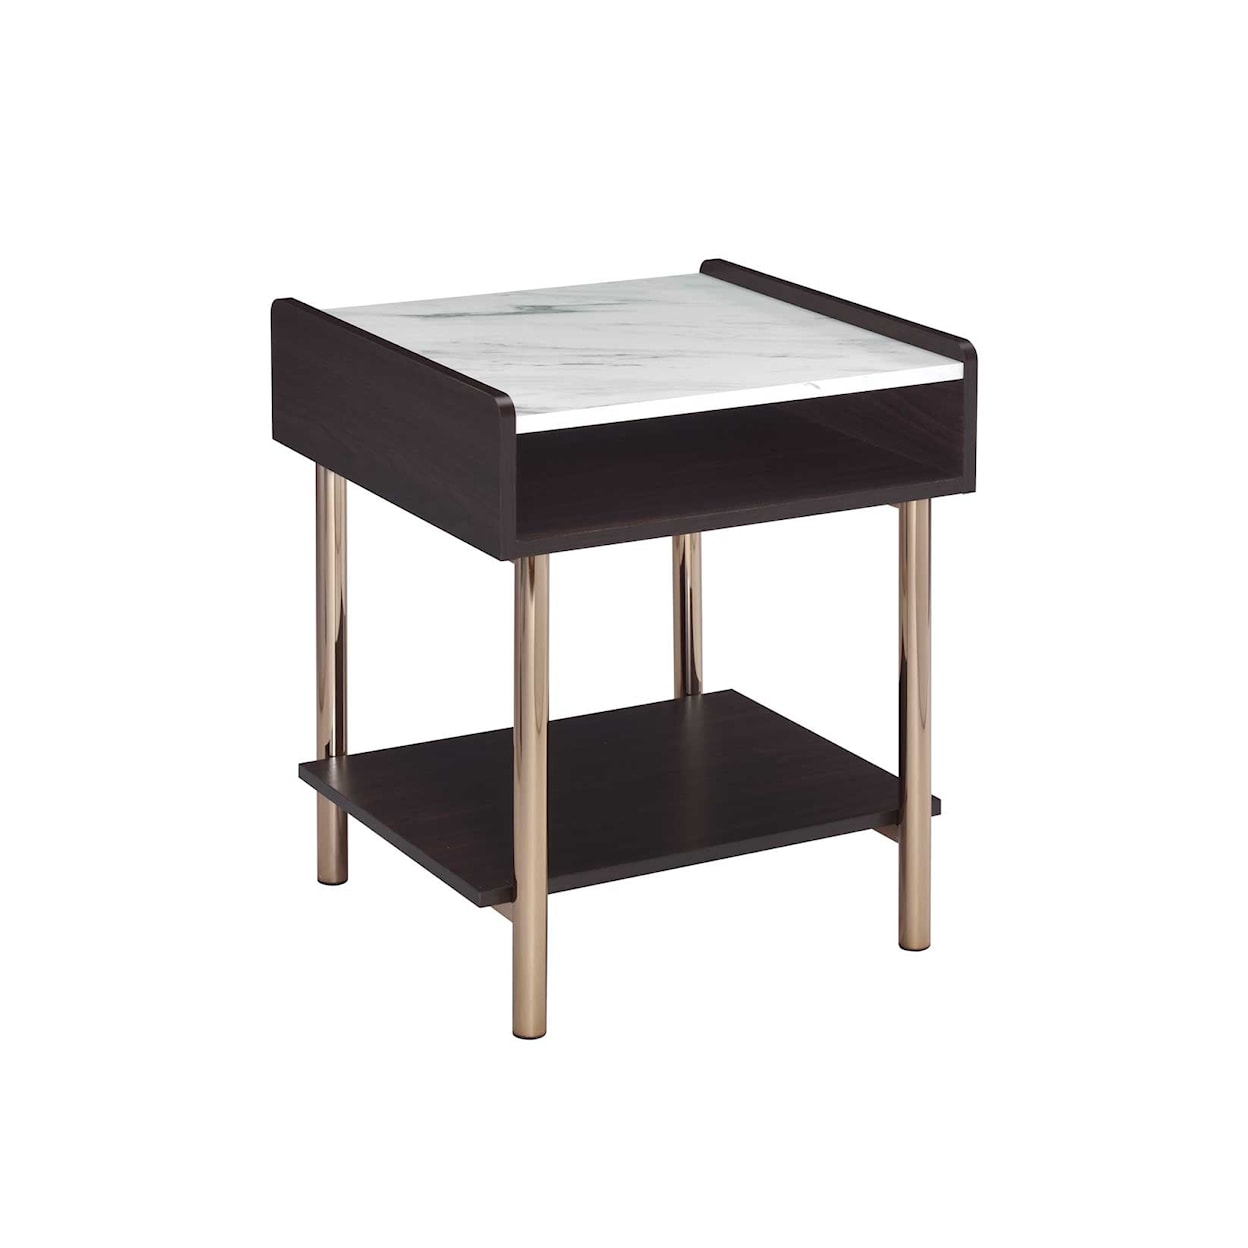 Prime Carrie End Table with Storage